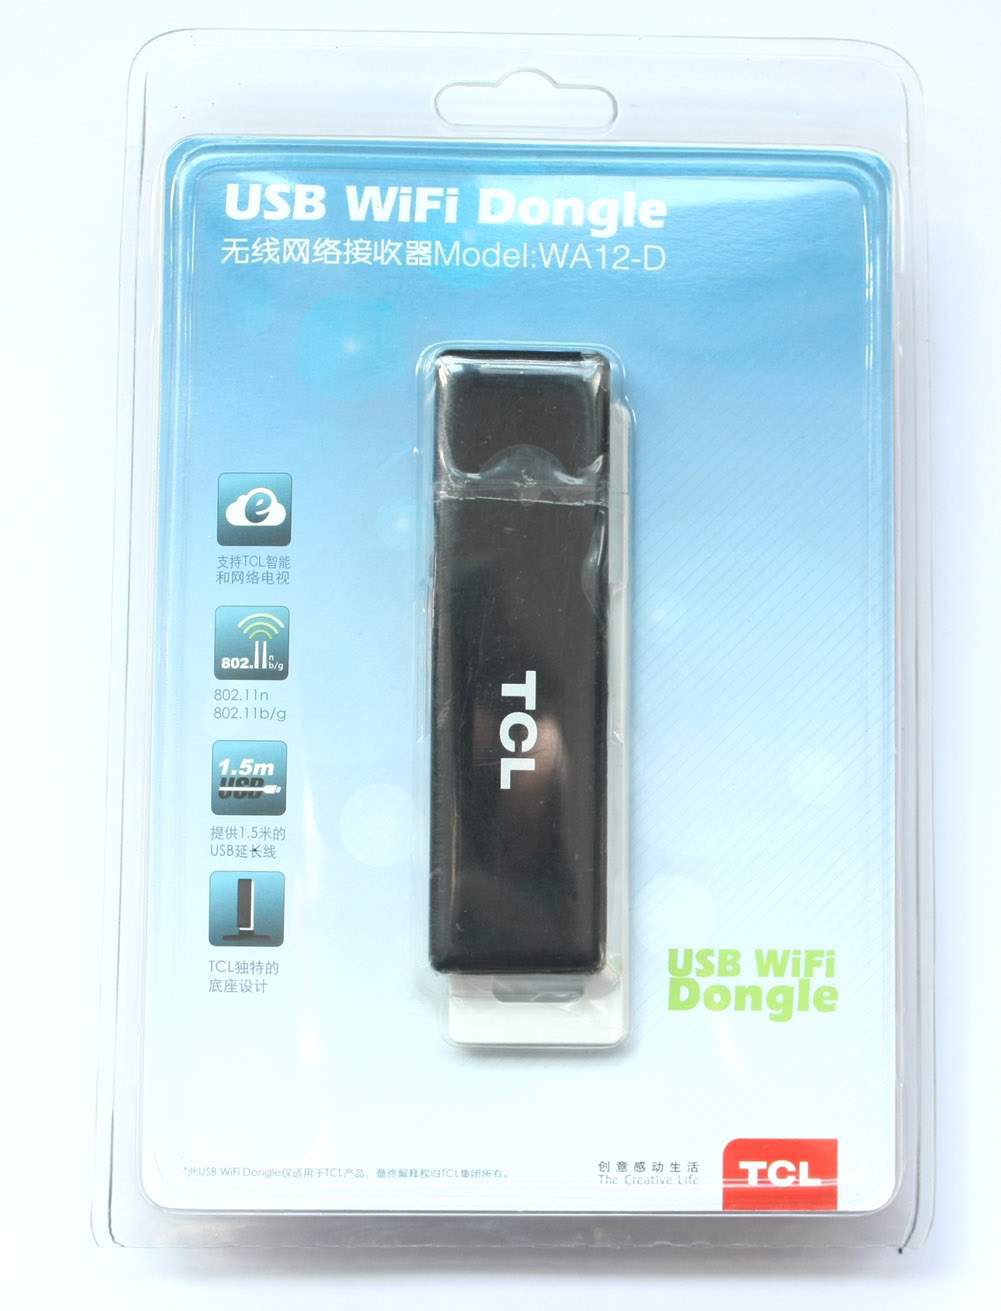 TCL WA12-D 300M 802.11b/g/n USB Wireless Wi-Fi Card Adapter for Smart Network Television TV